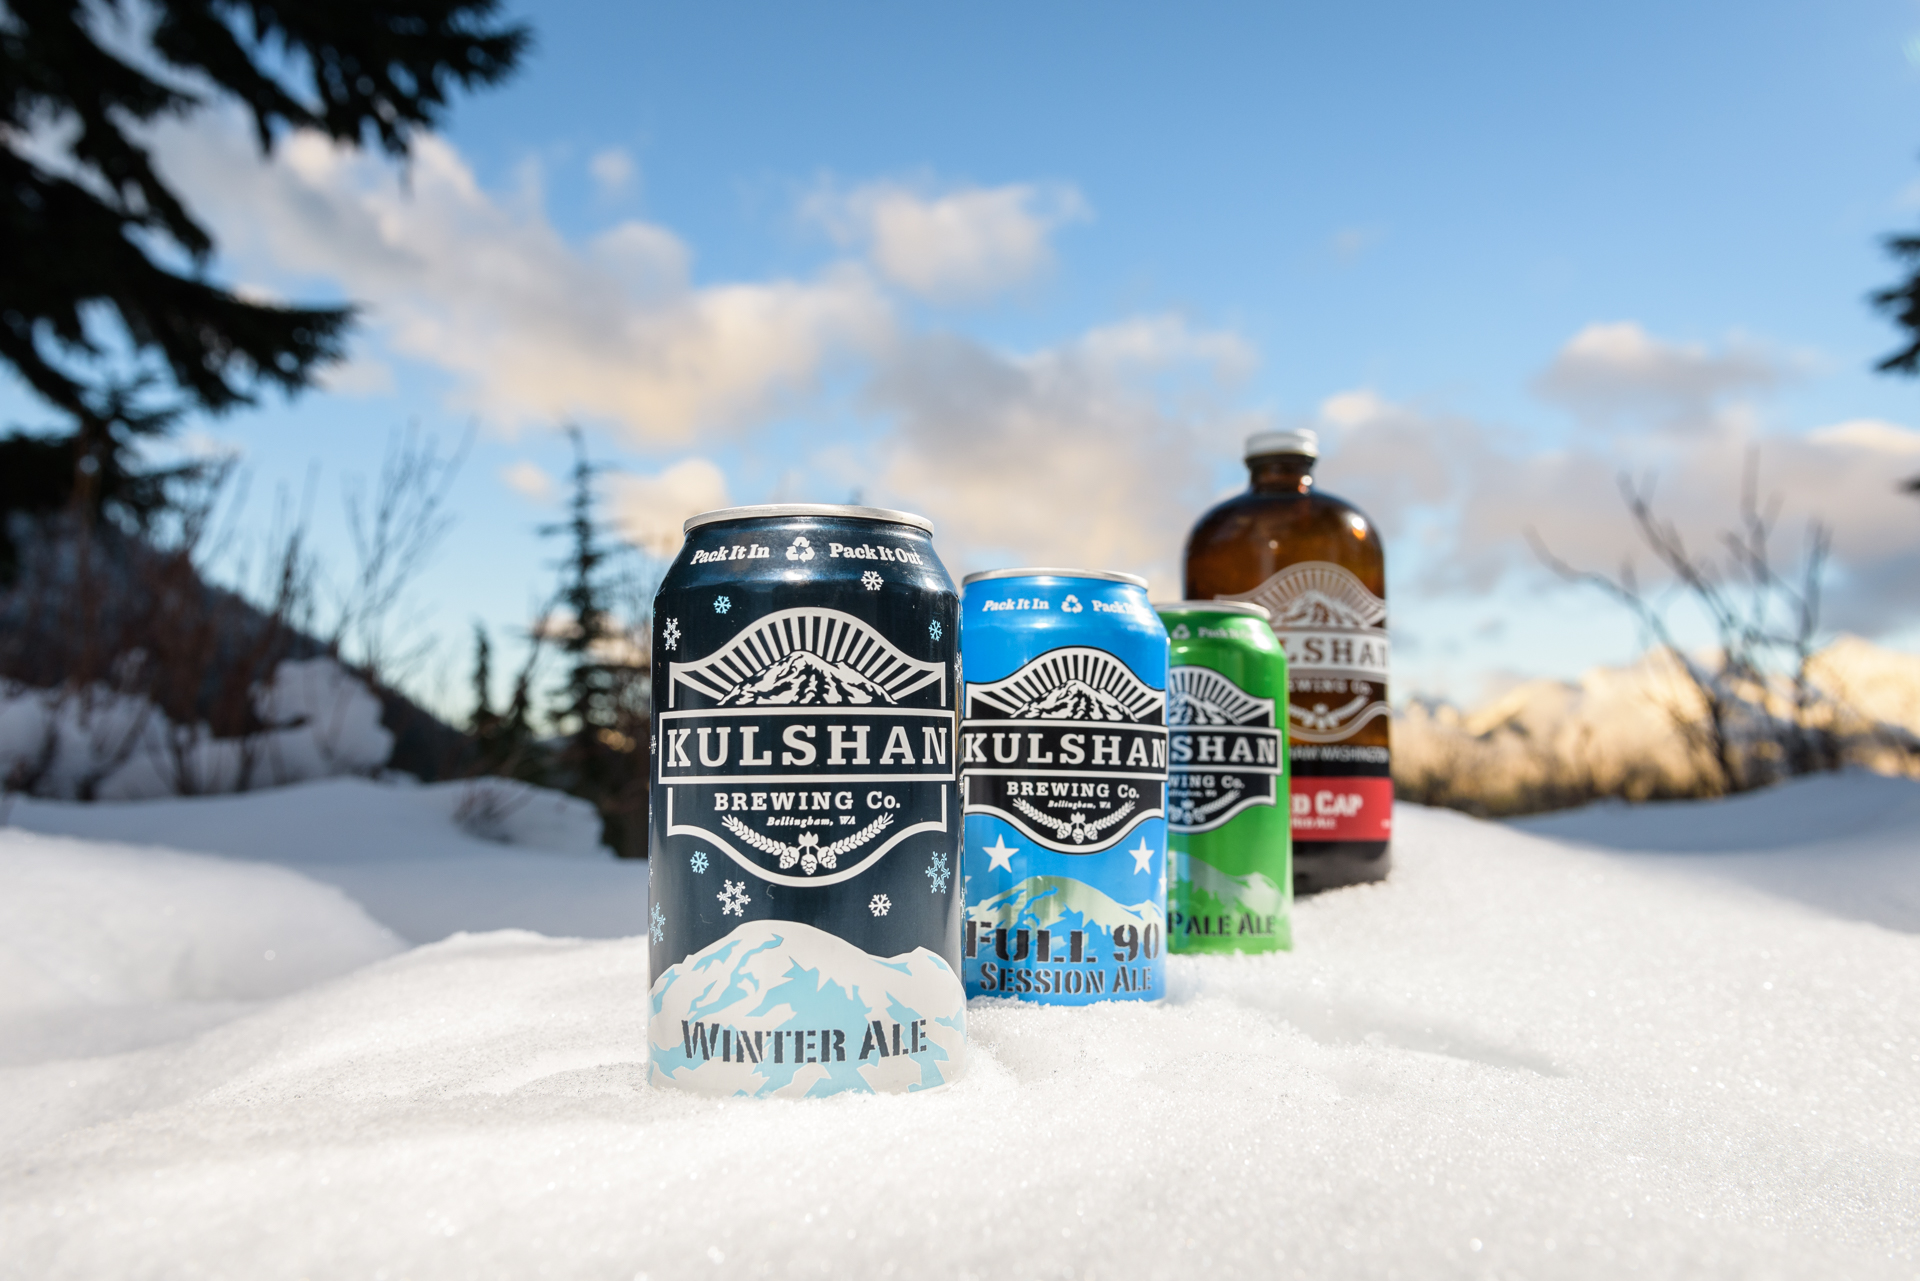 Kulshan beer cans in the snow